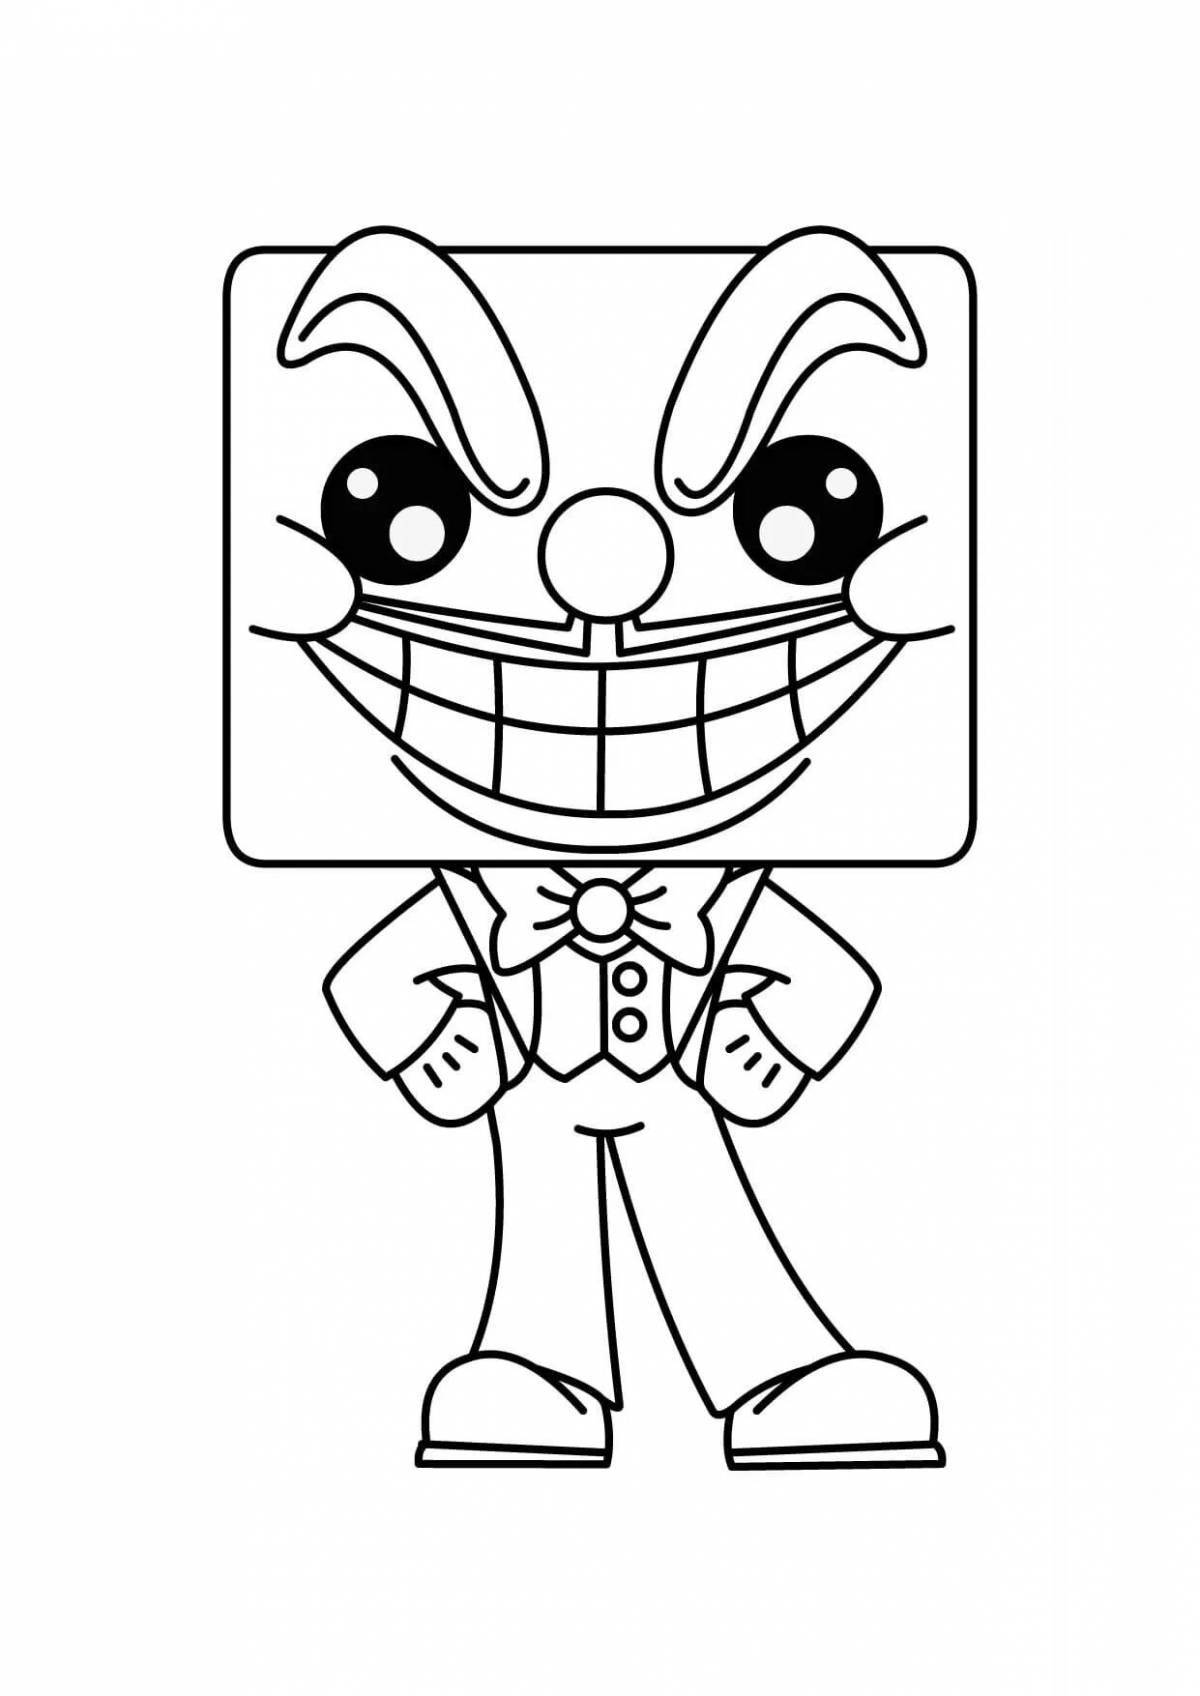 Coloring page for dynamic cuphead bosses